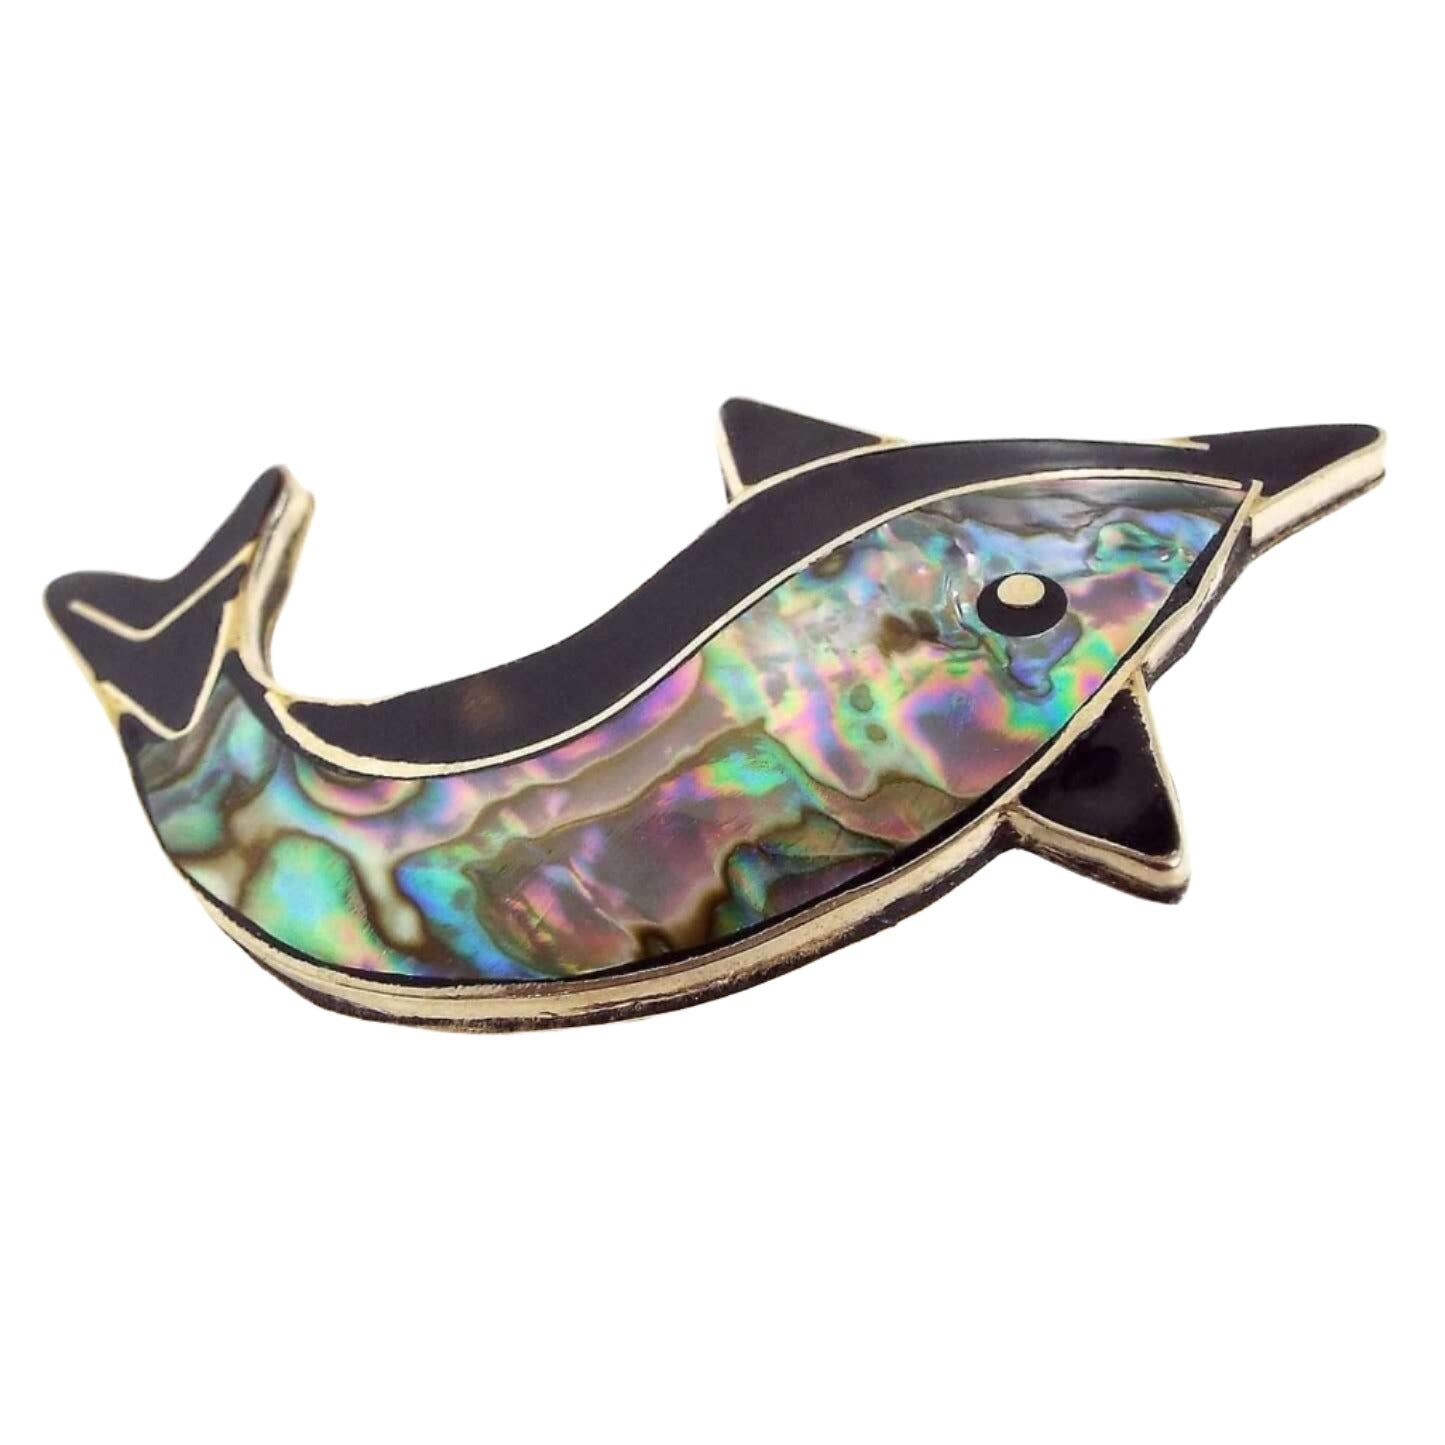 Front view of the Mexican alpaca retro vintage dolphin brooch pin. The metal is silver tone in color. The top part of the dolphin and his fins are black enameled. The inside body area has inlaid abalone shell that is pearly multi color and shifts as you move around.